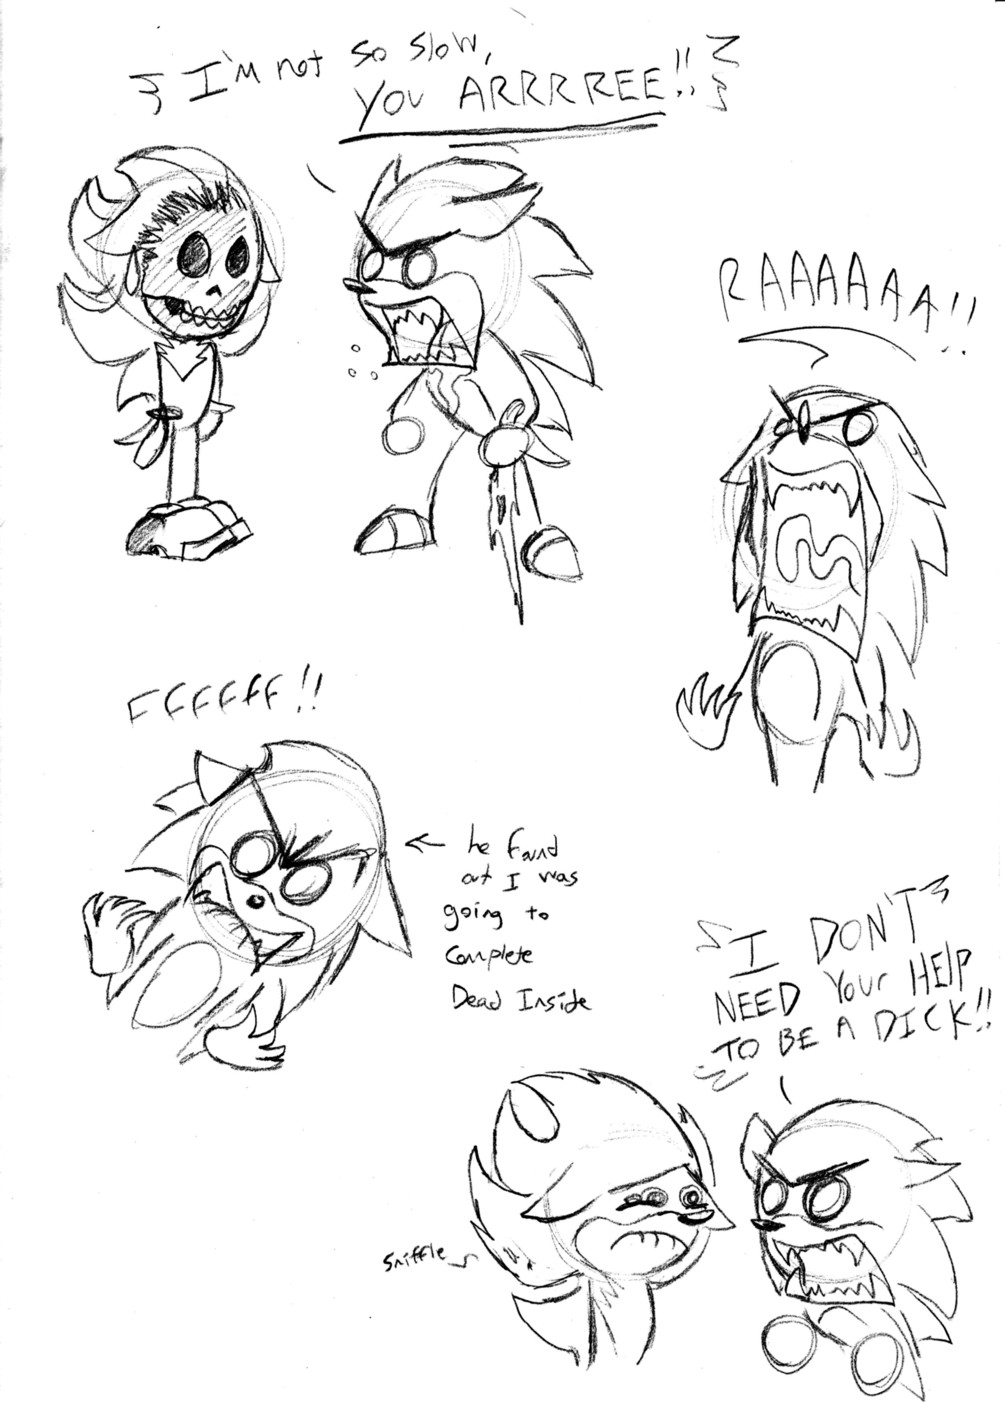 Angry Sonic Sketch Dump 3 by TheGameArtCritic